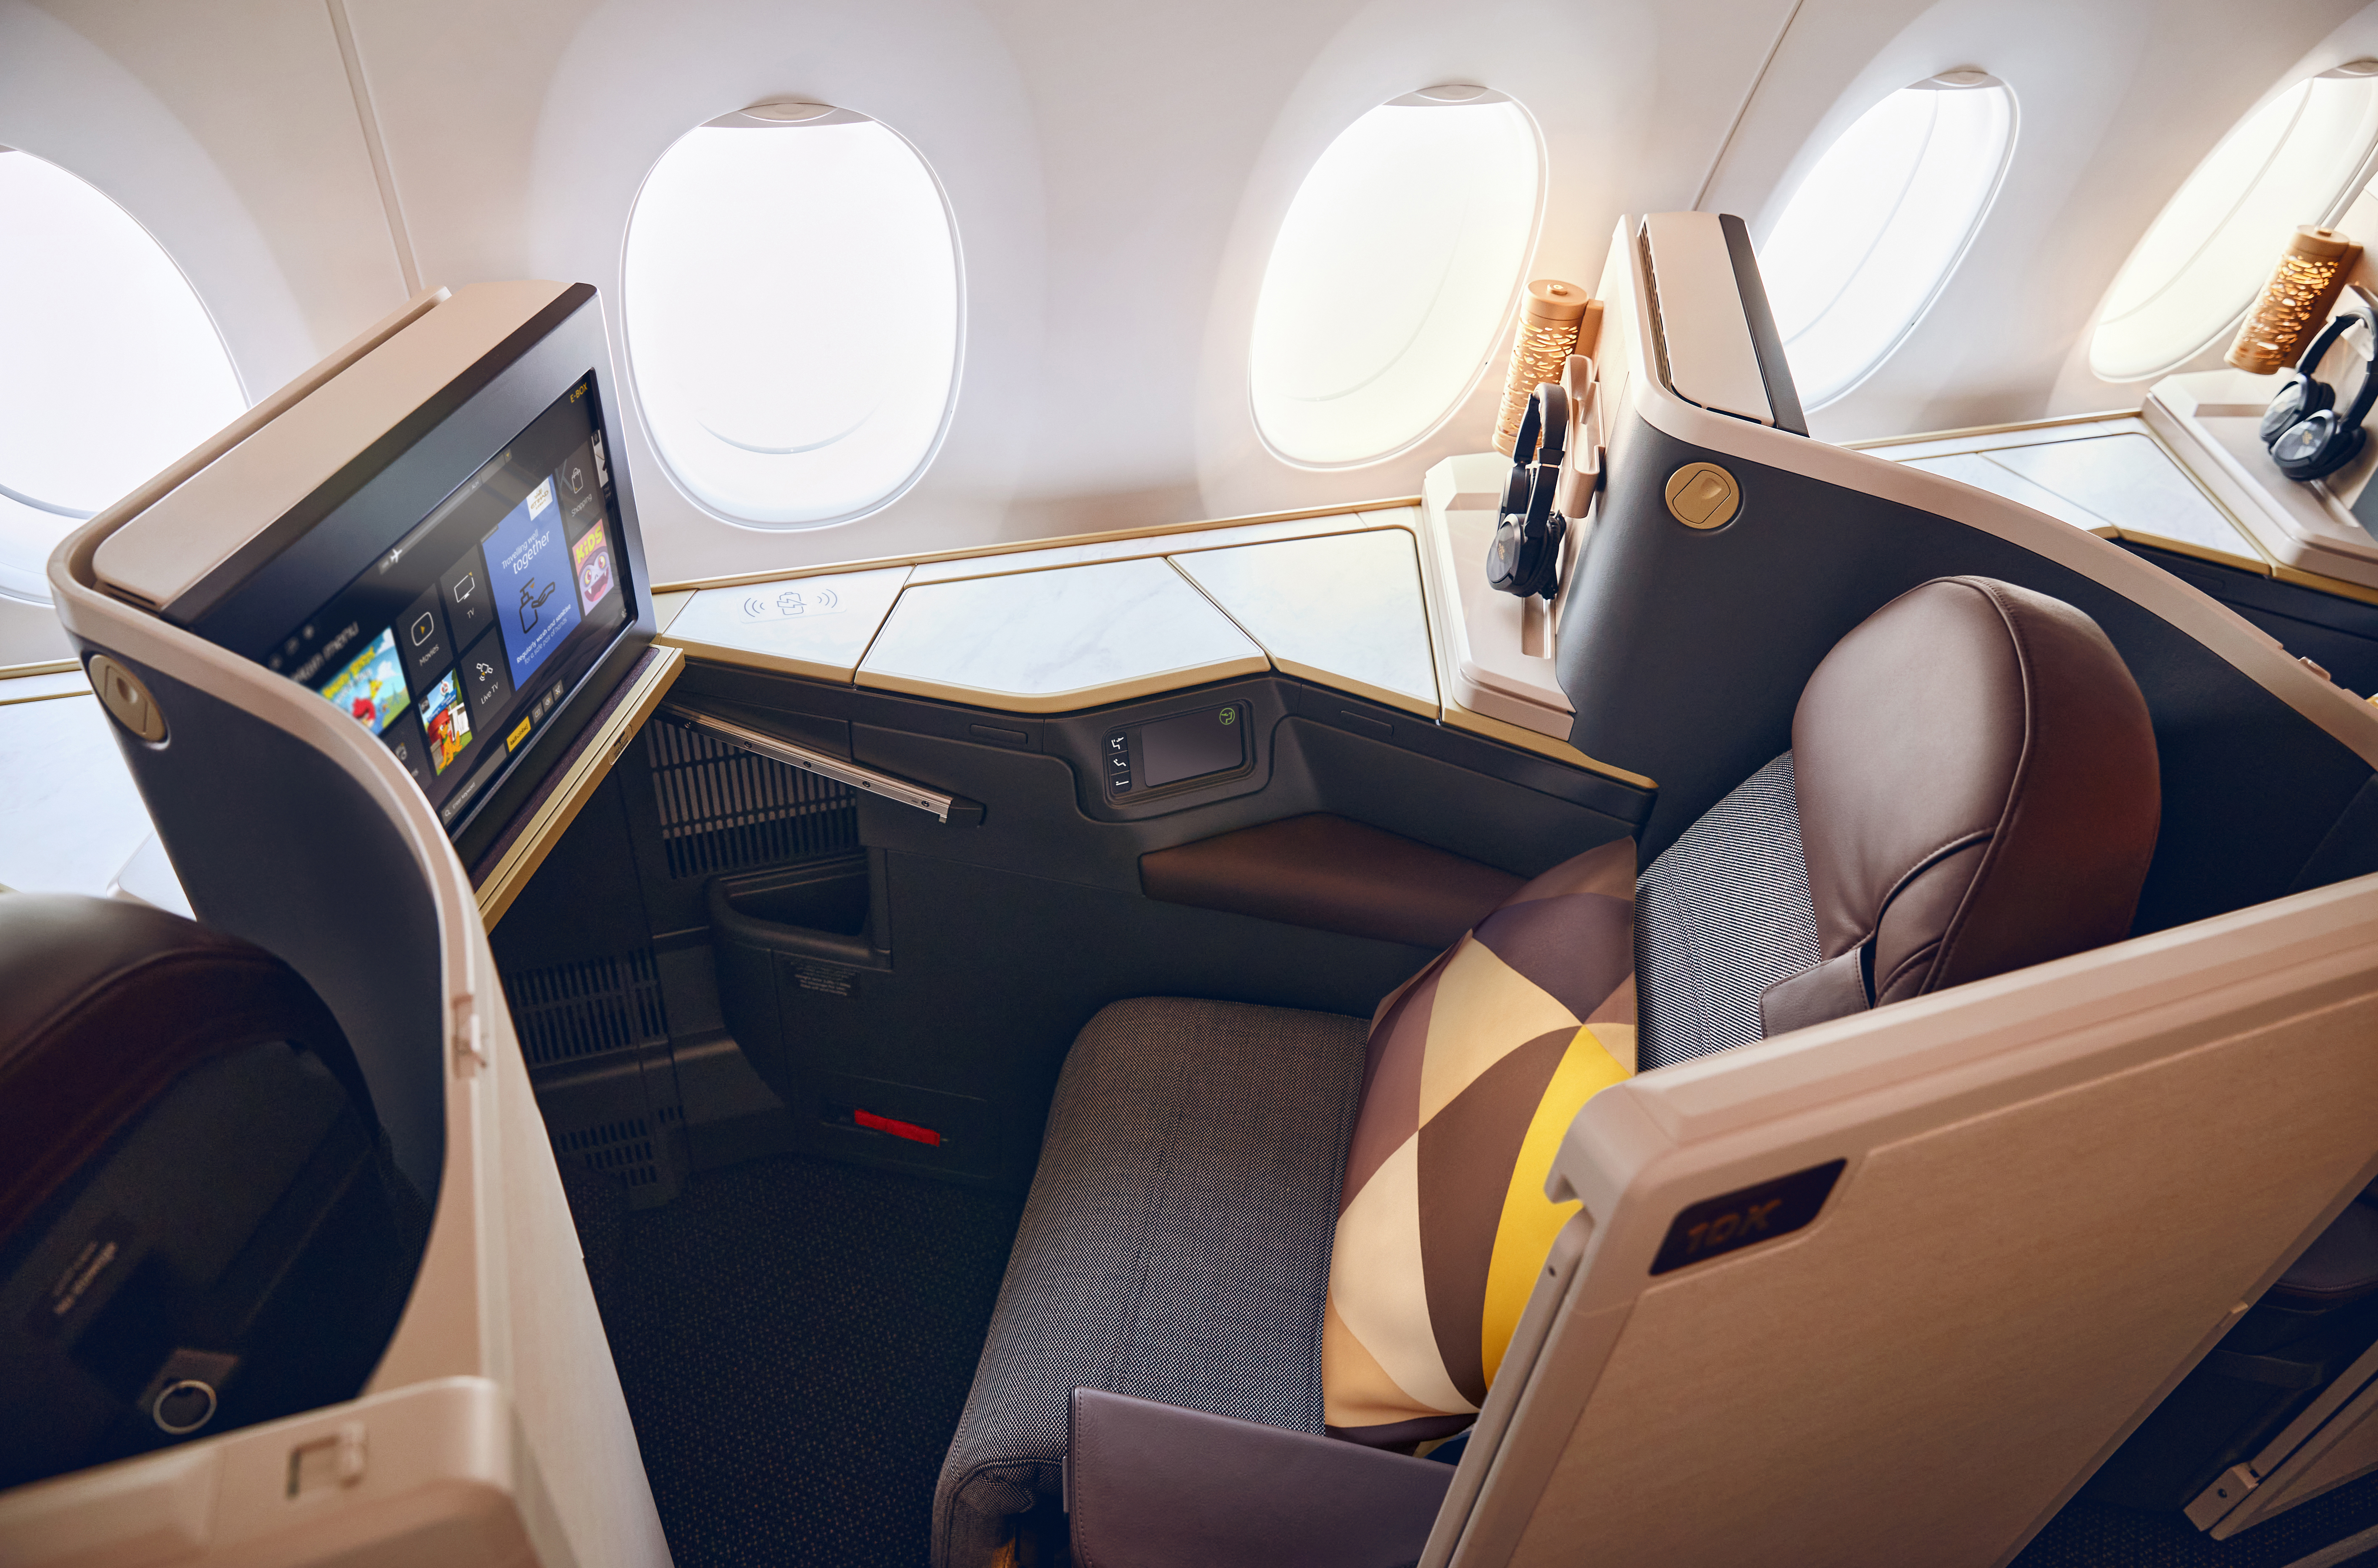 Special Trip Report: Etihad’s New A350 proposition breathes fresh
life into the carrier